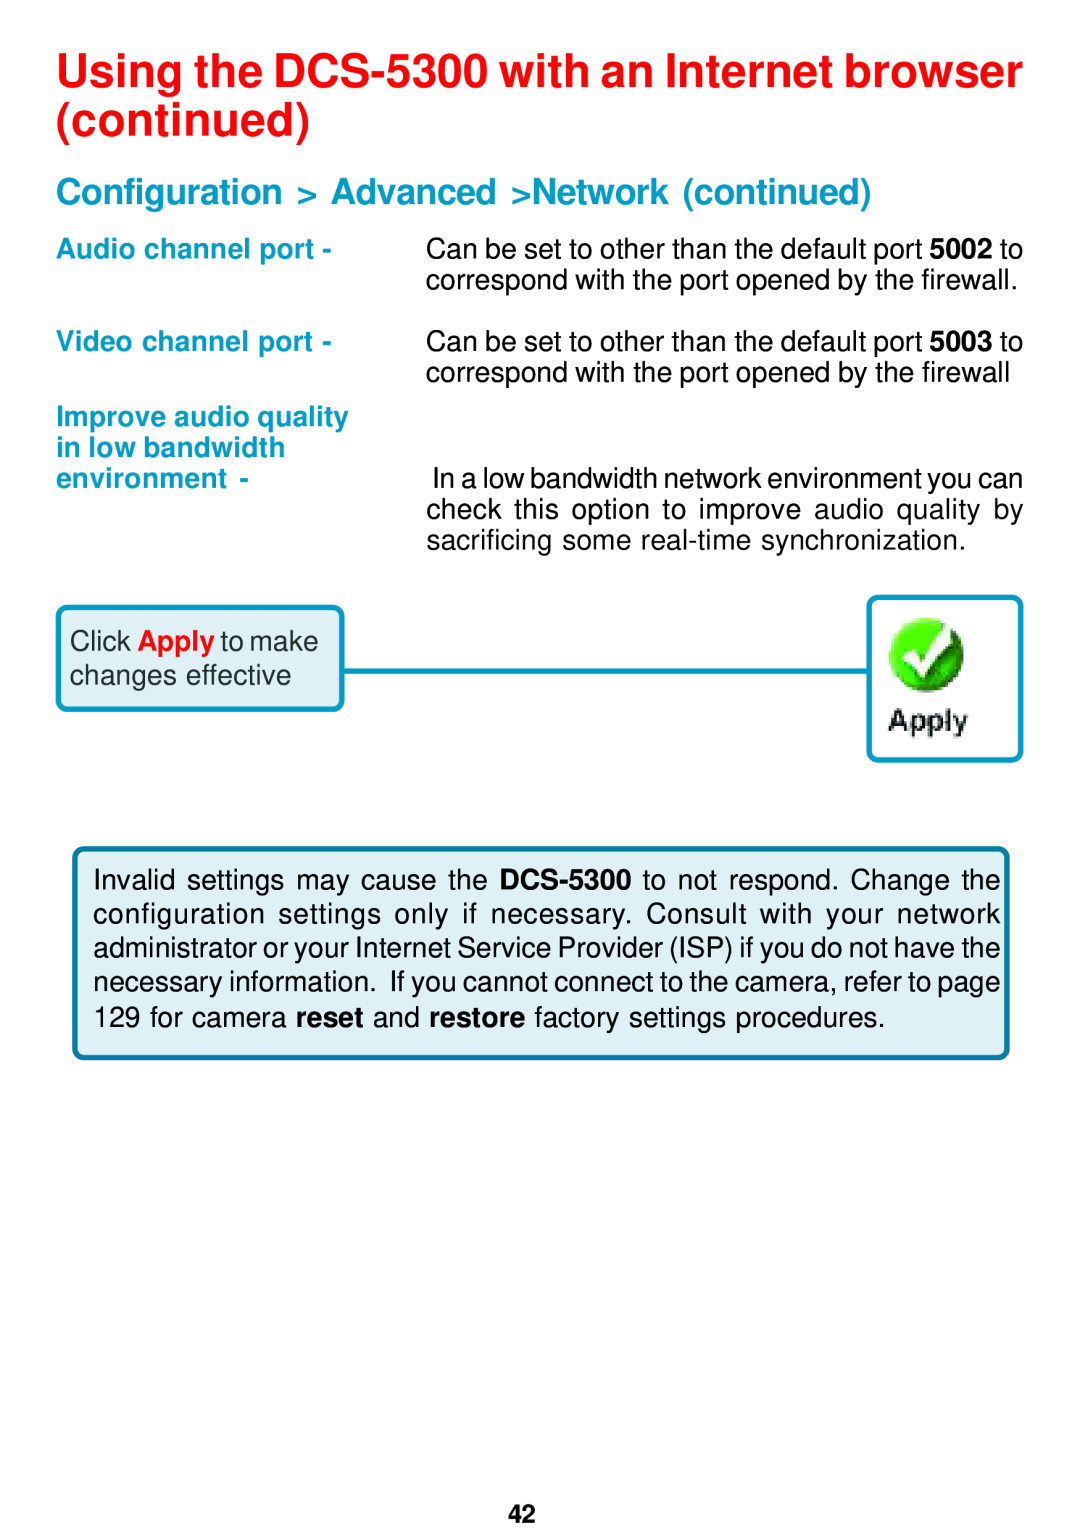 D-Link manual Using the DCS-5300 with an Internet browser continued, Configuration Advanced Network continued 